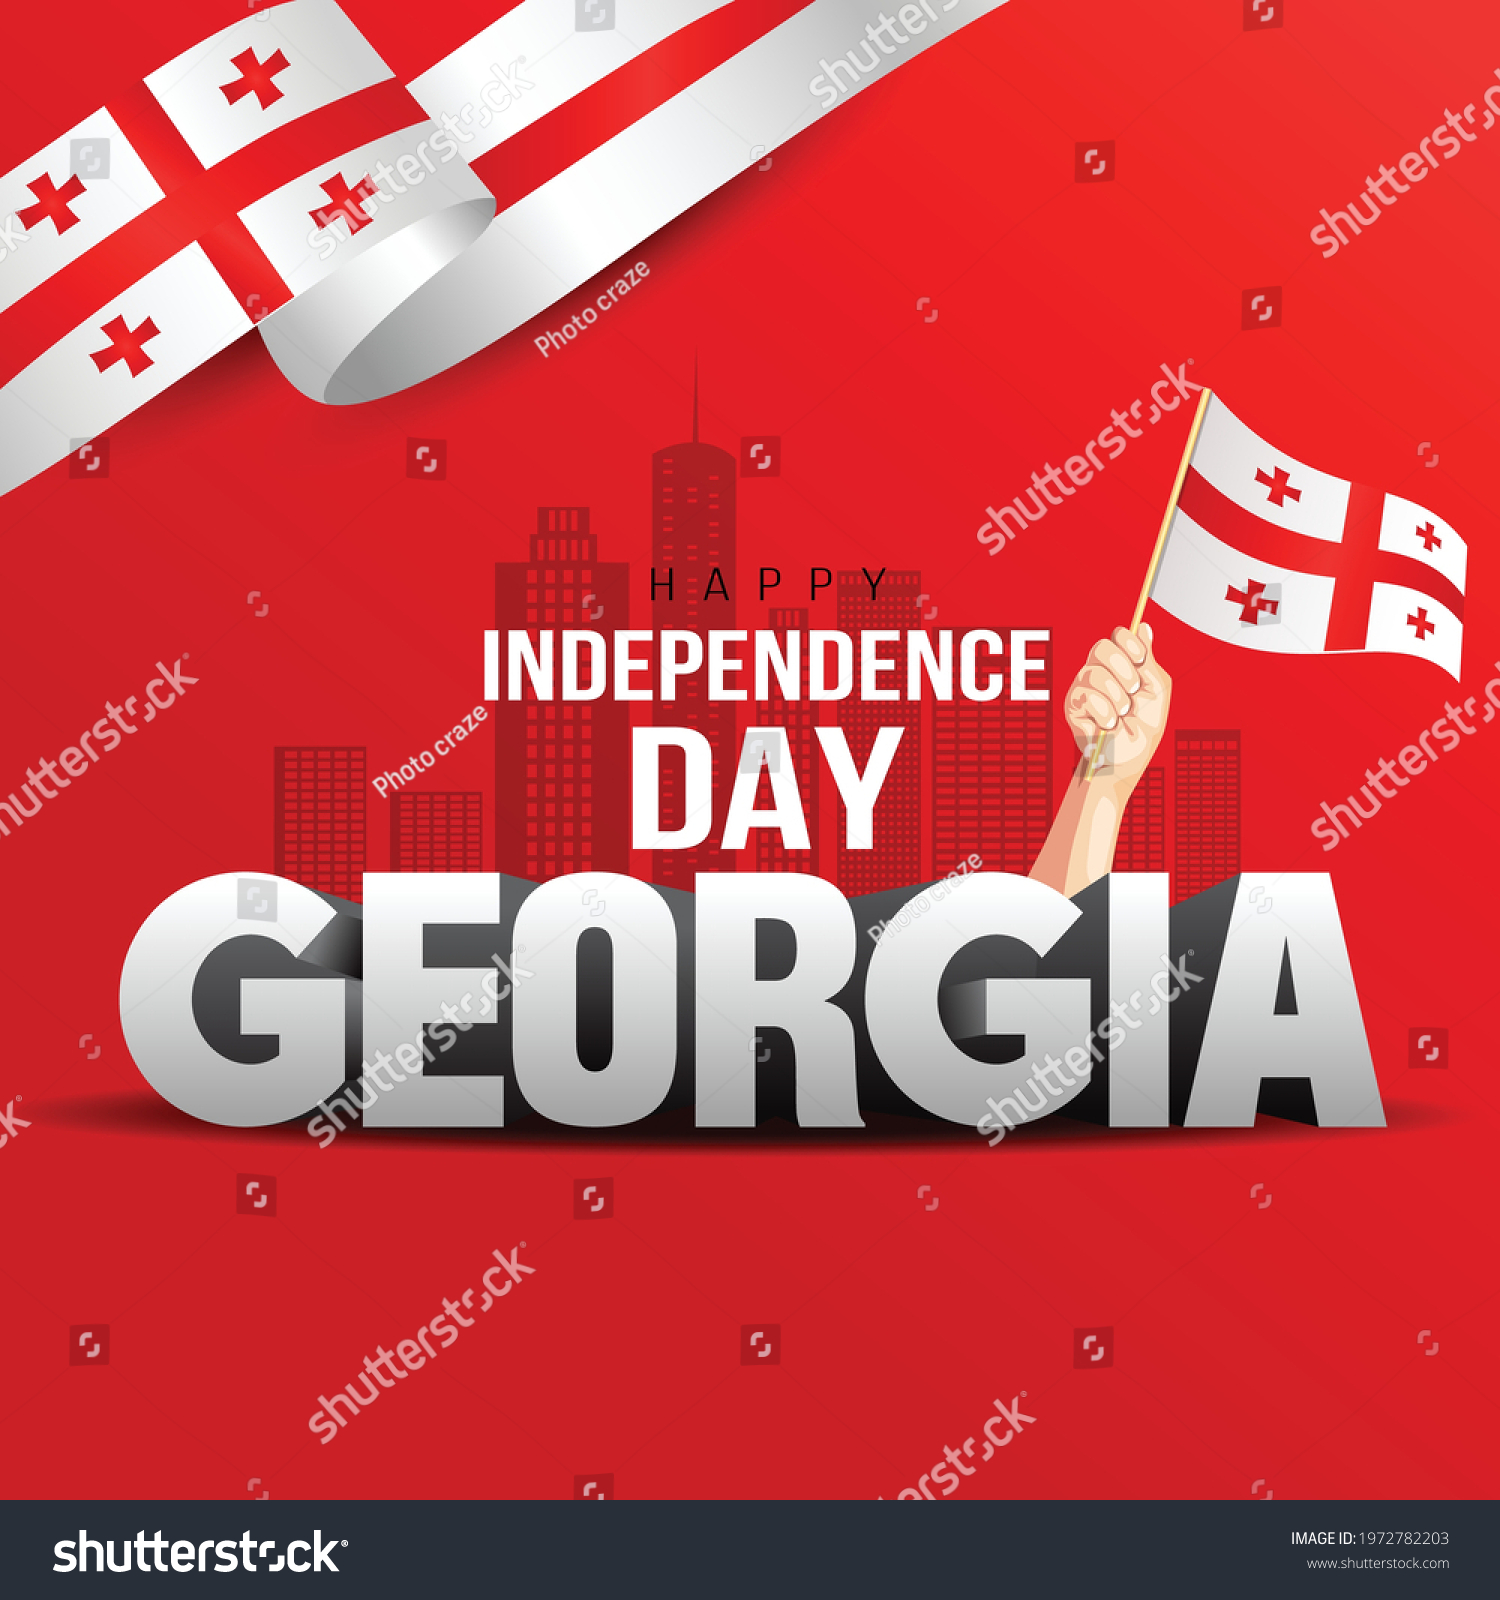 SVG of Happy Independence Day Georgia Vector Template Design Illustration. man hand with flag svg